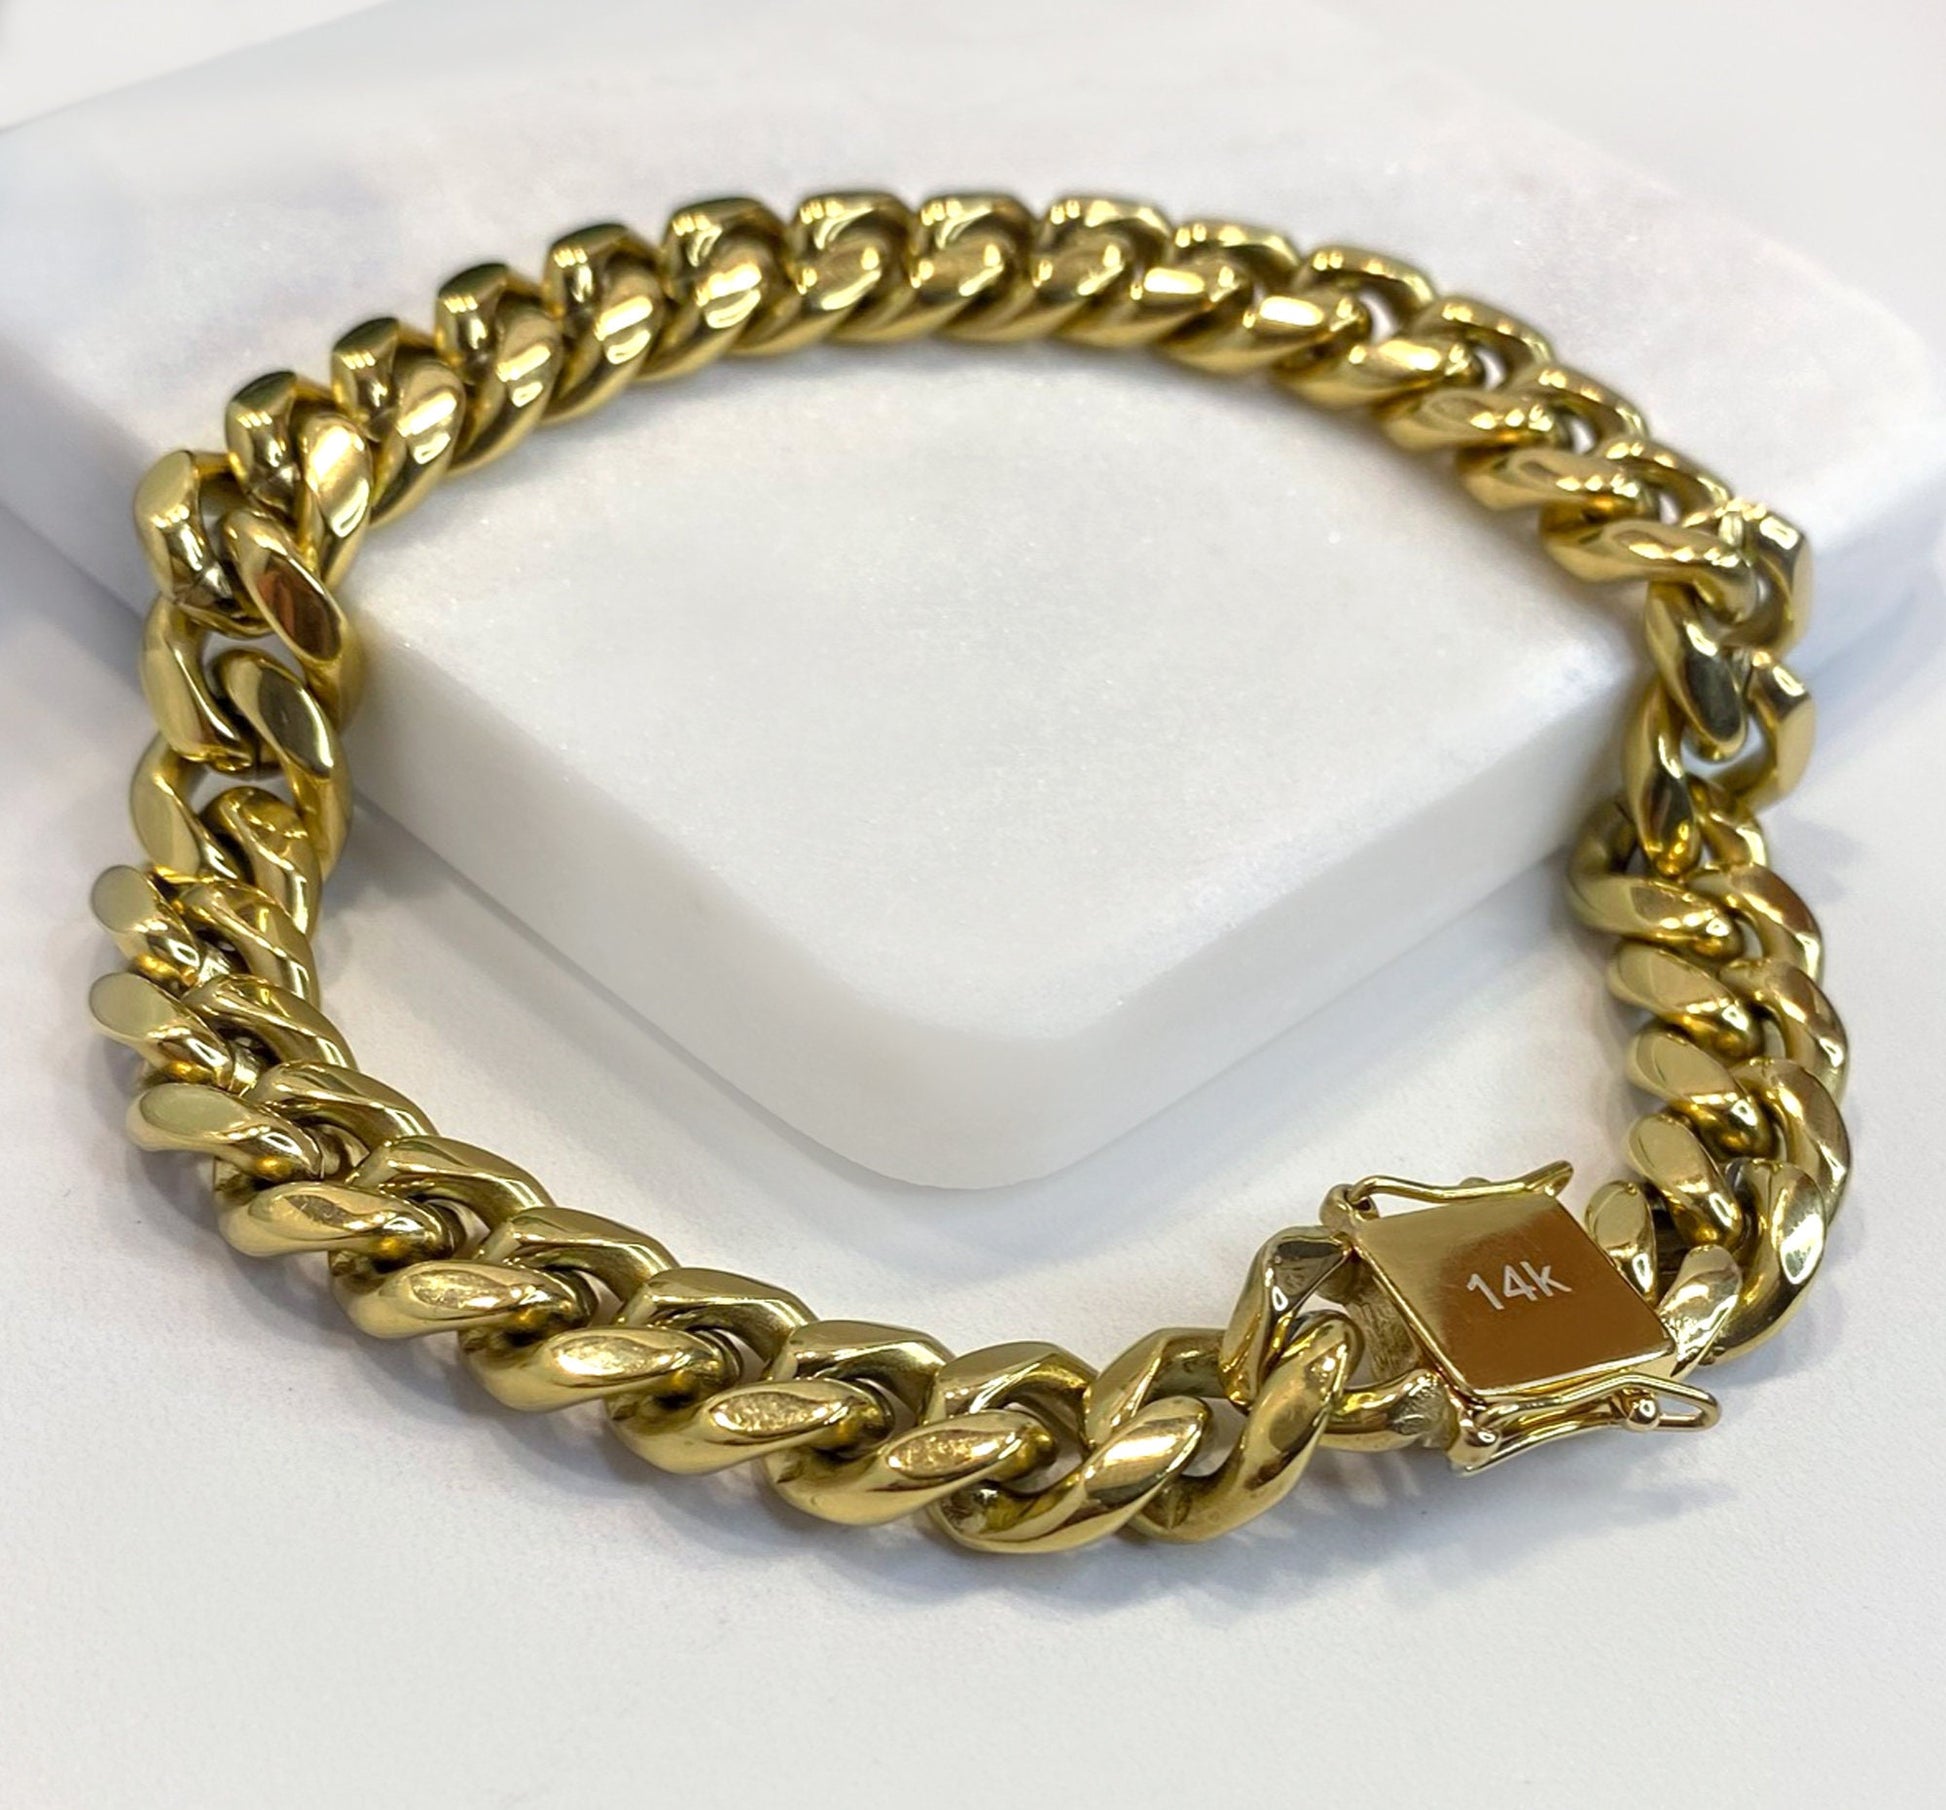 12mm Miami Cuban Link Bracelet In 14k Gold Filled Featuring Double Safety Lock Box Clasp, Unisex Curb Chain, Wholesale Jewelry Supplies